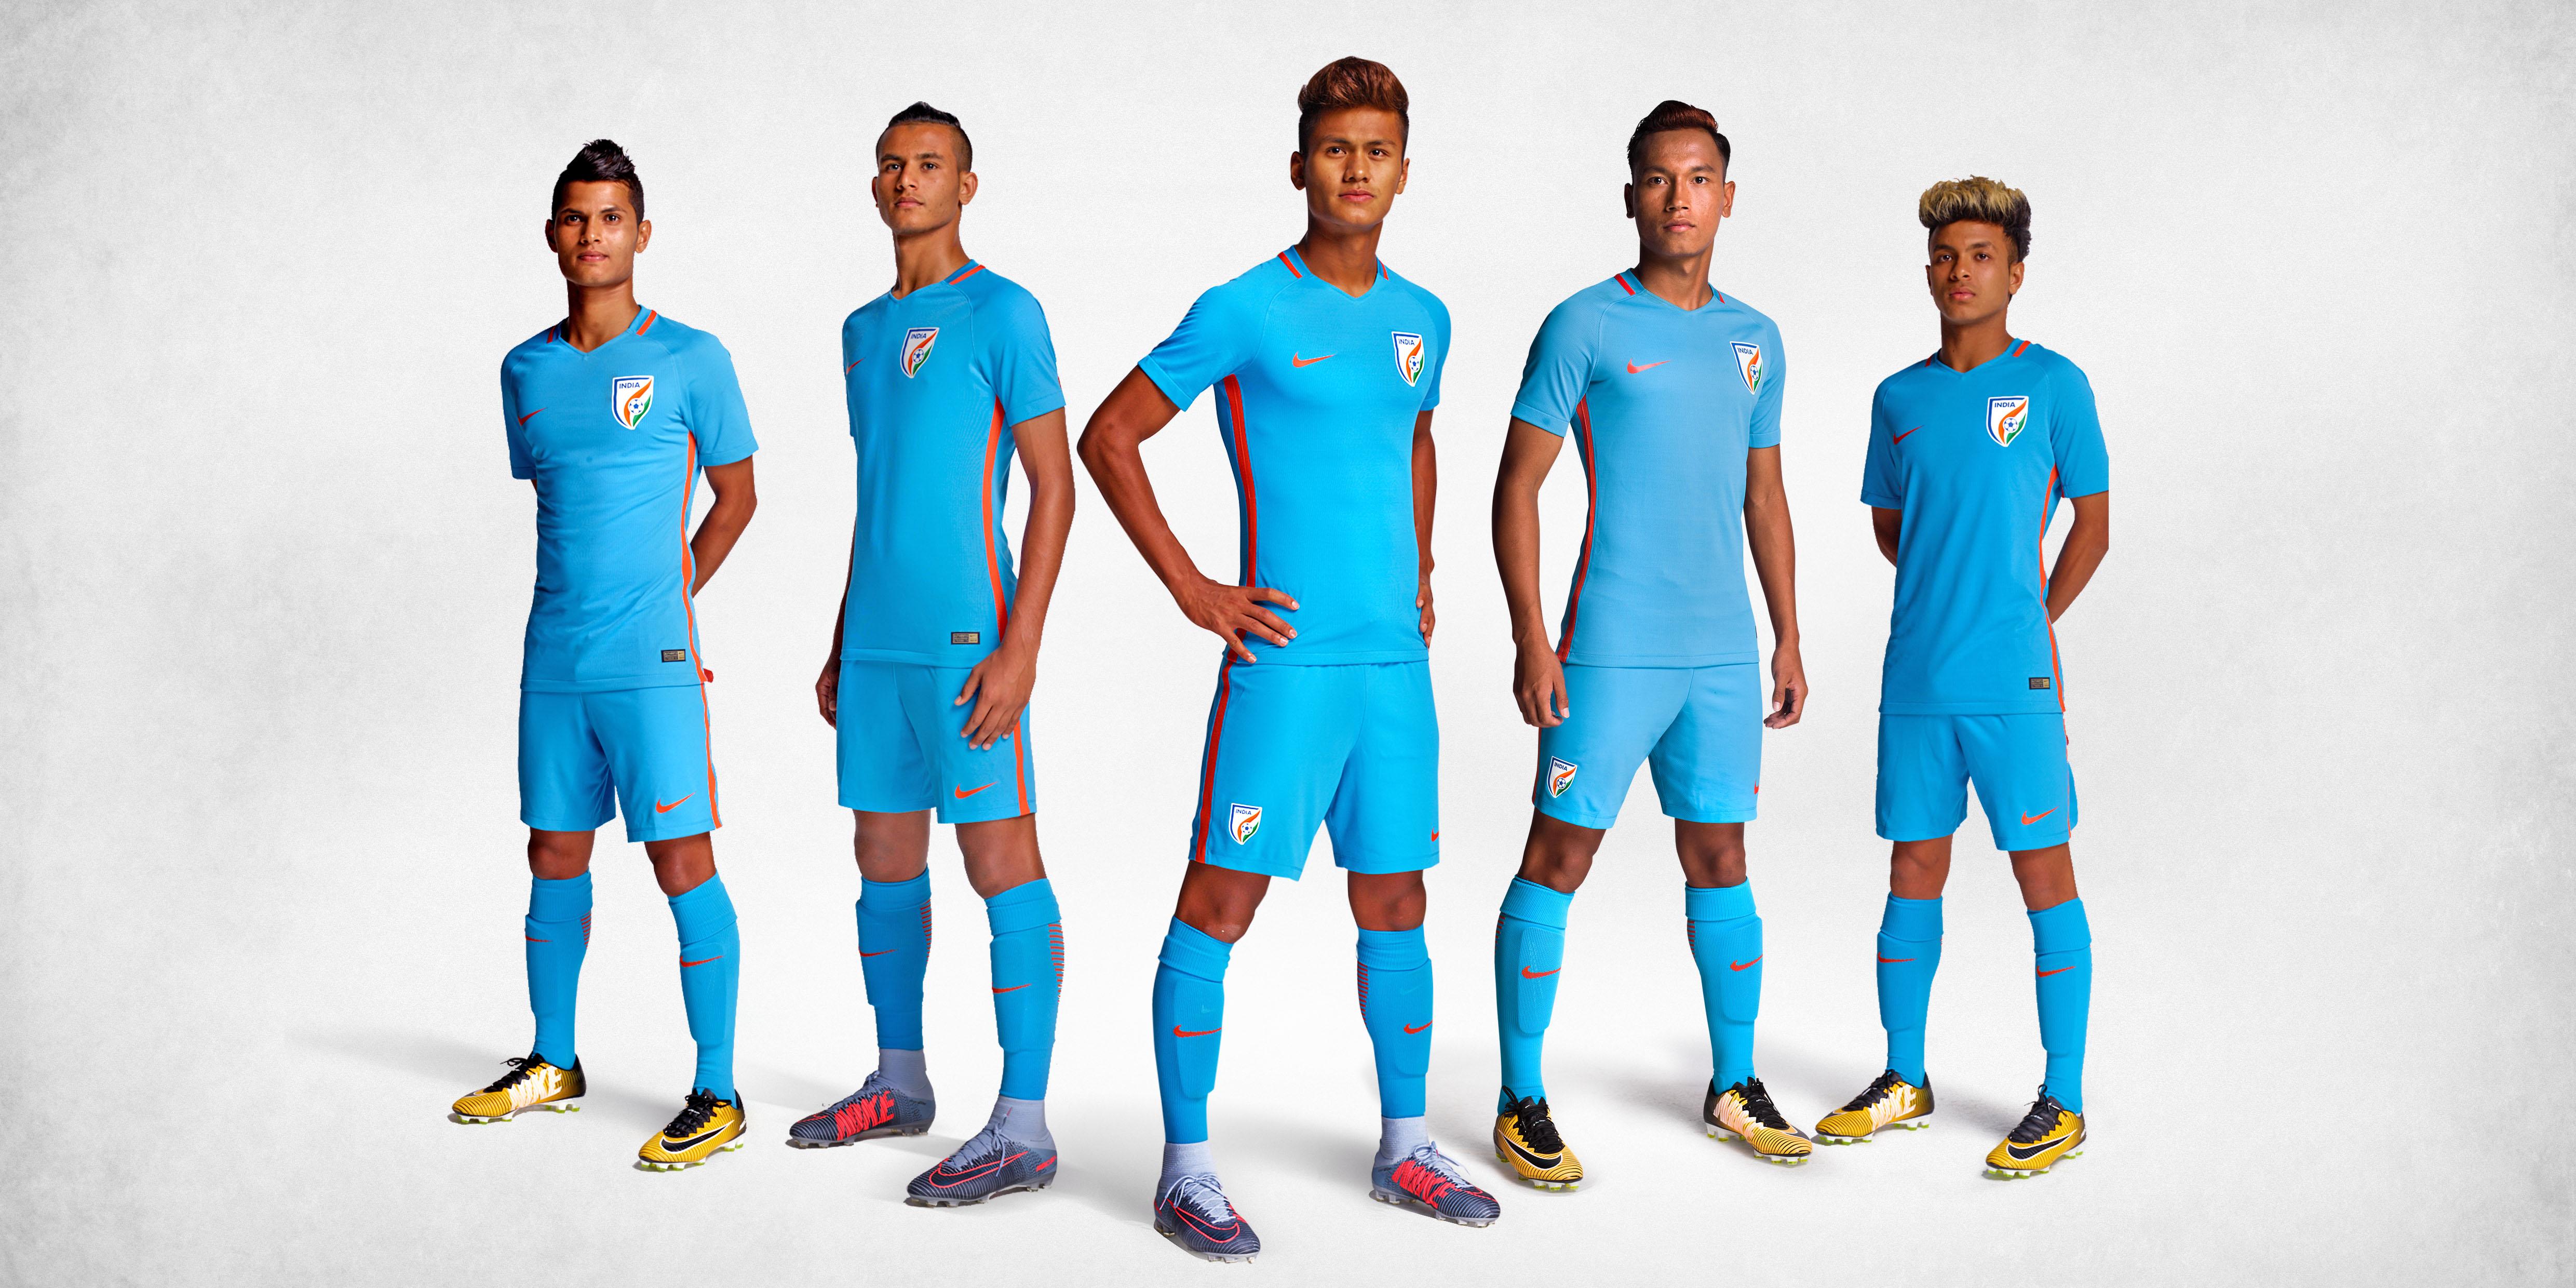 Nike launches team India’s new kit for FIFA U-17 World Cup